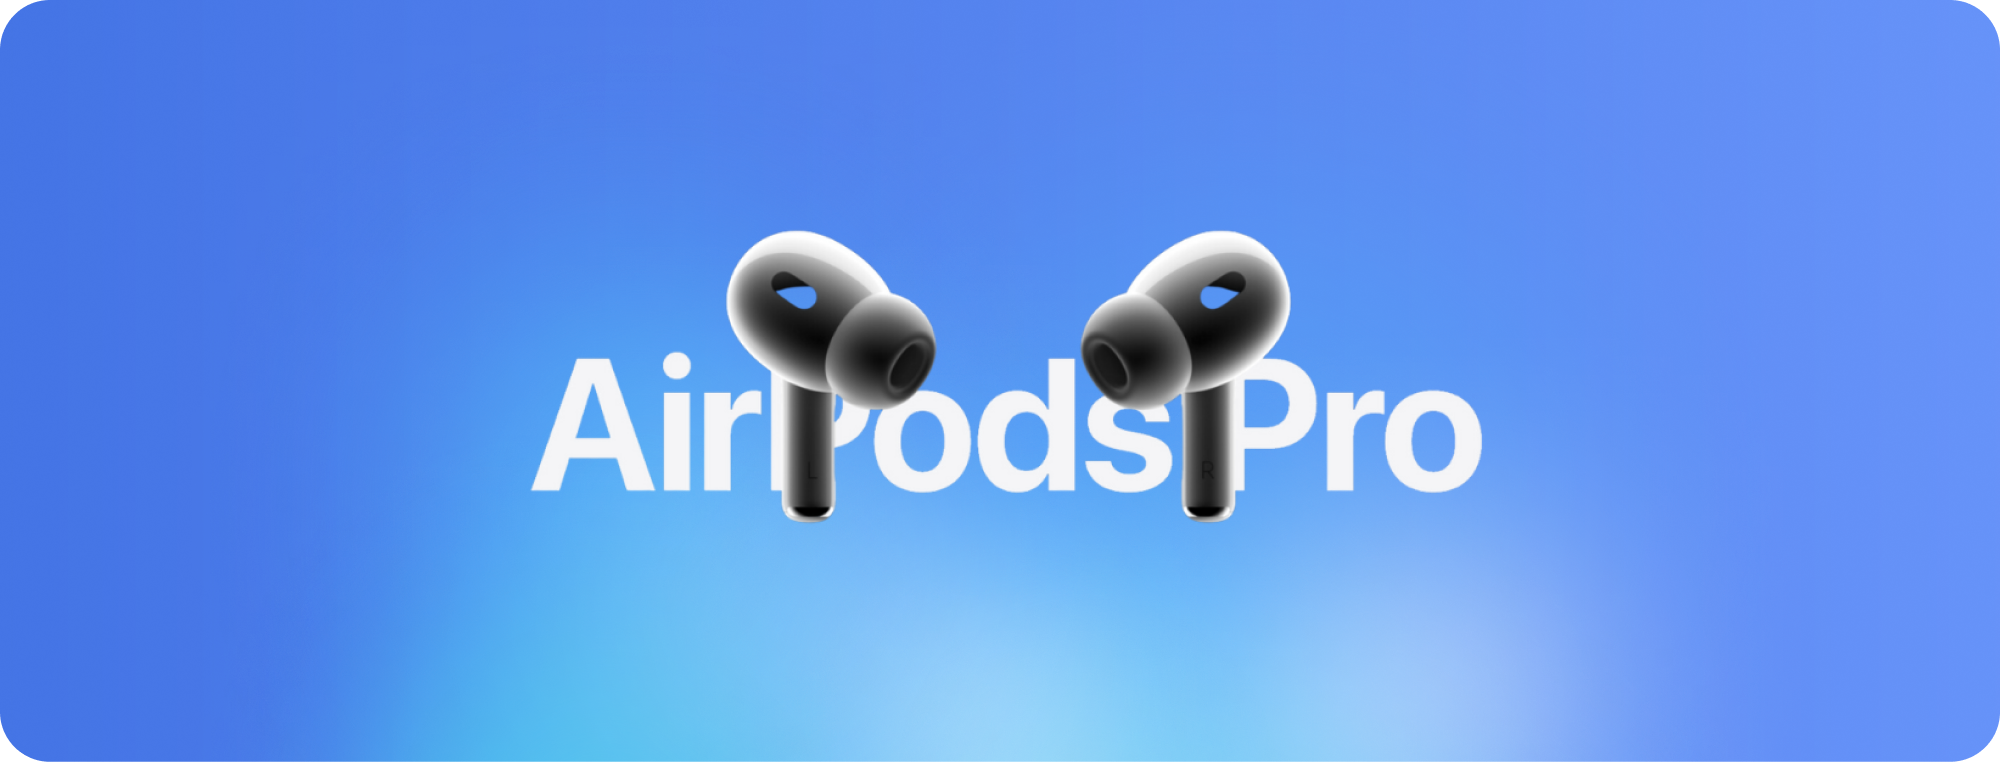 AirPods Pro Header Image